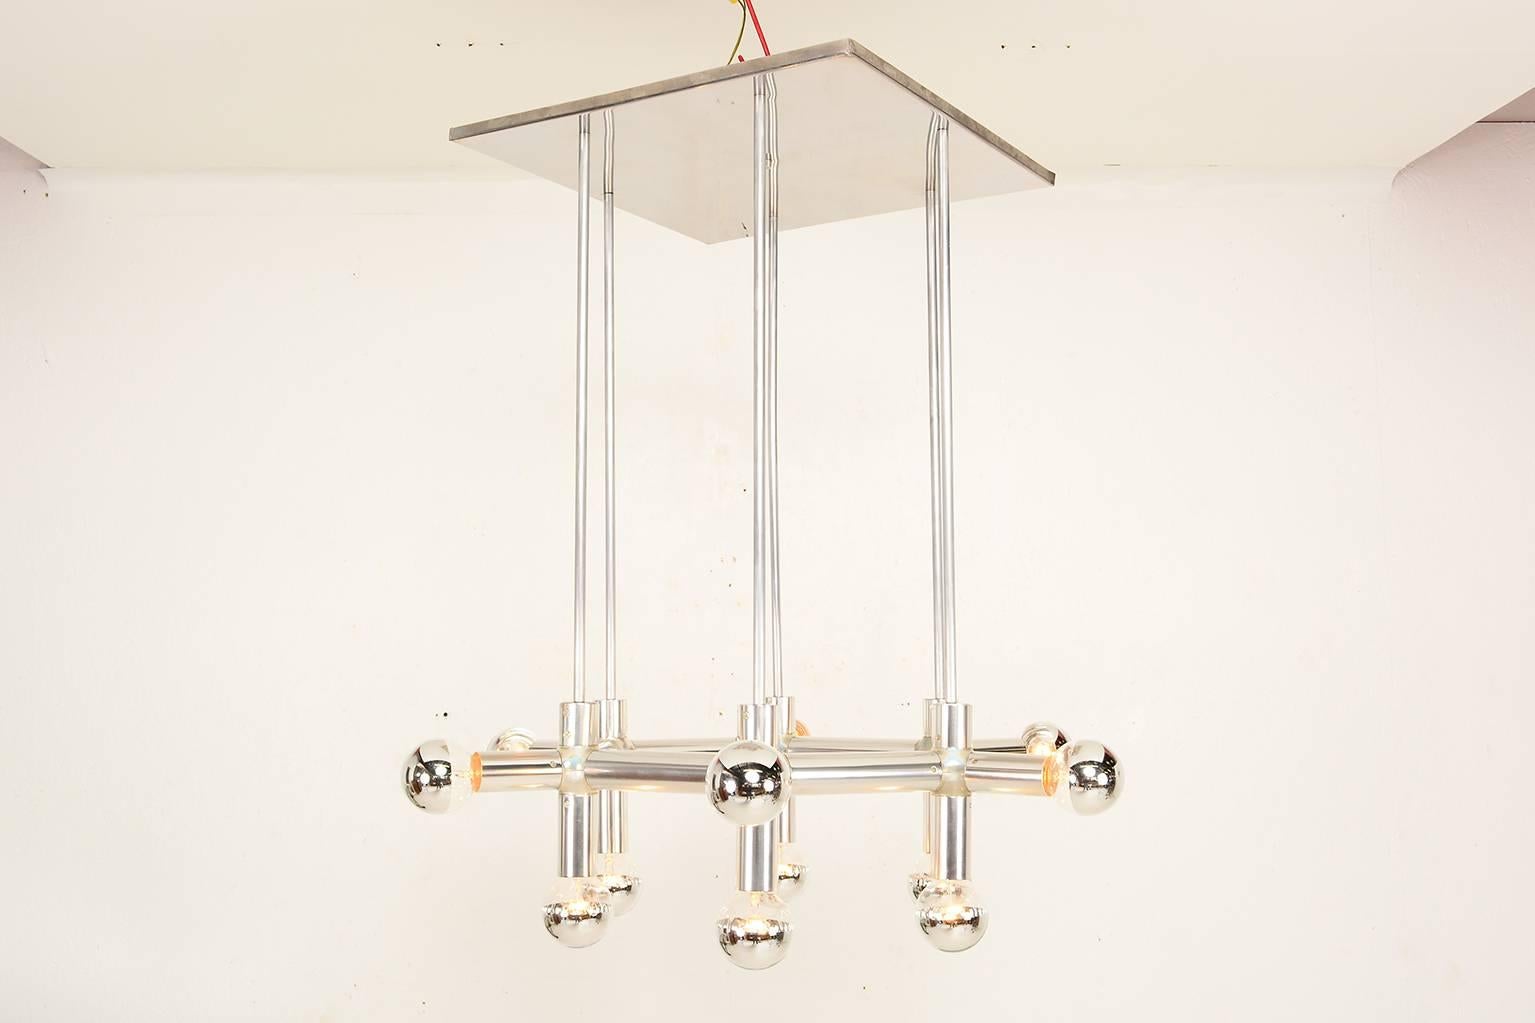 For your consideration a vintage chandelier by Robert Haussmann. 

Atomic/molecular in anodized aluminum.

Requires 12 bulb (included 25 watts half chrome round shape).

The chandelier is suspended by aluminum rods from a stainless steel